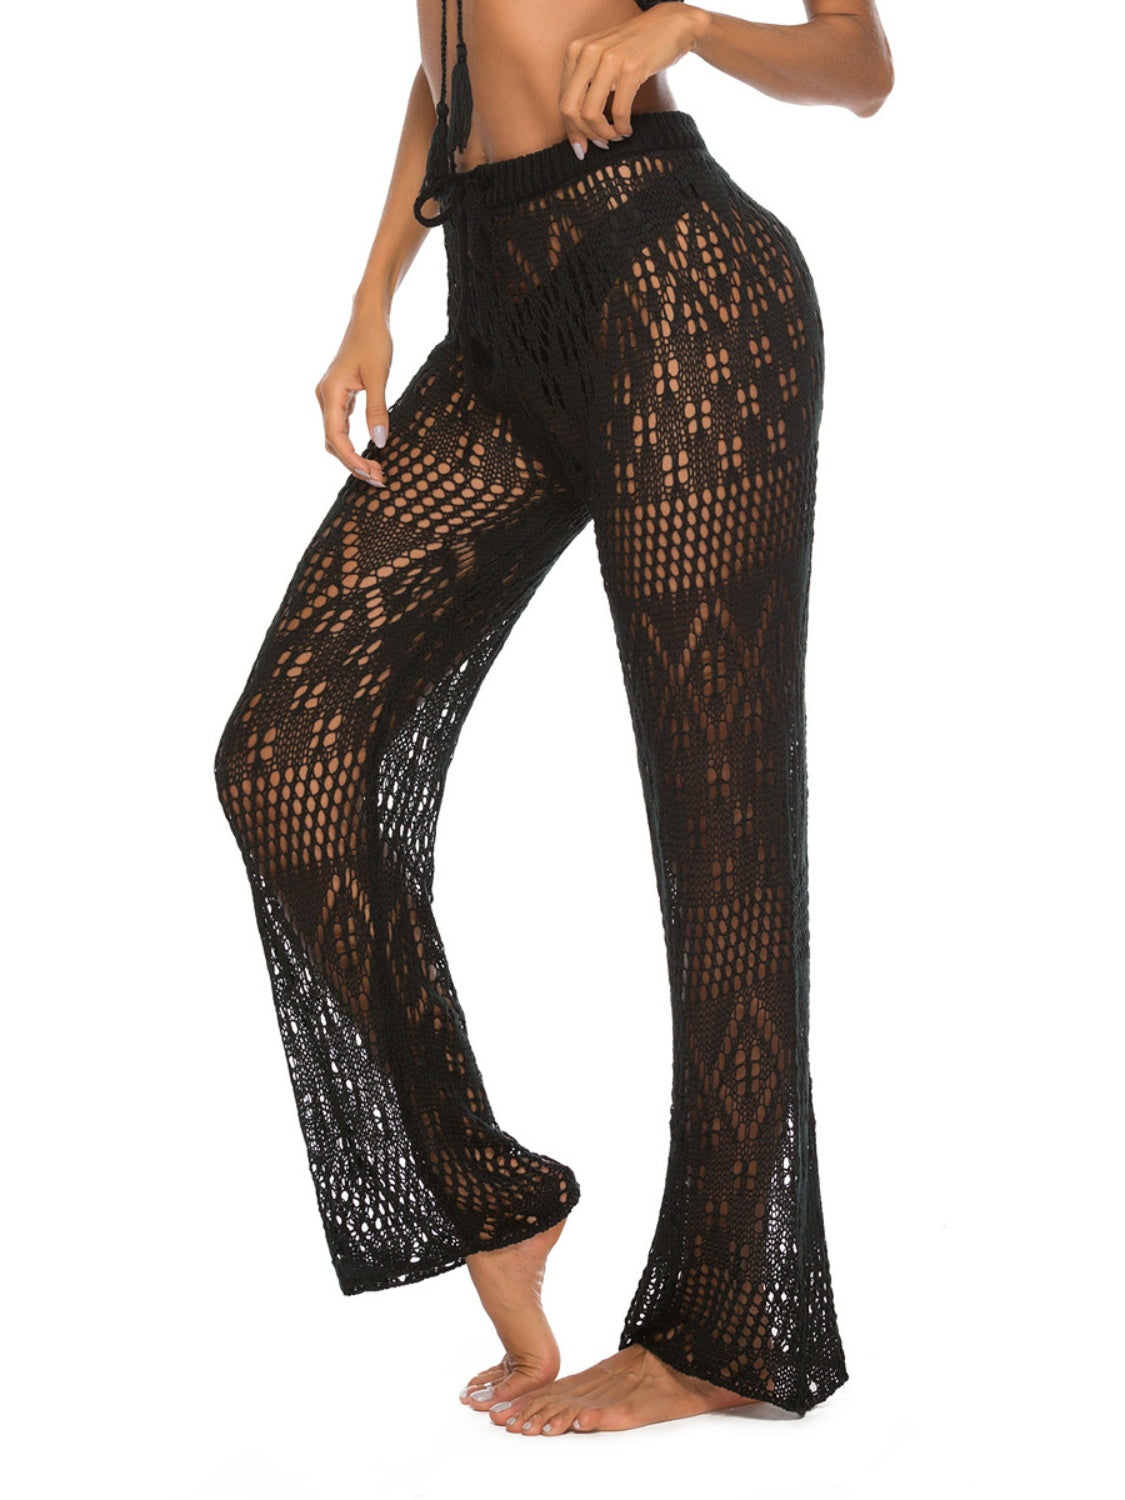 CUTOUT STRAIGHT COVER UP PANTS